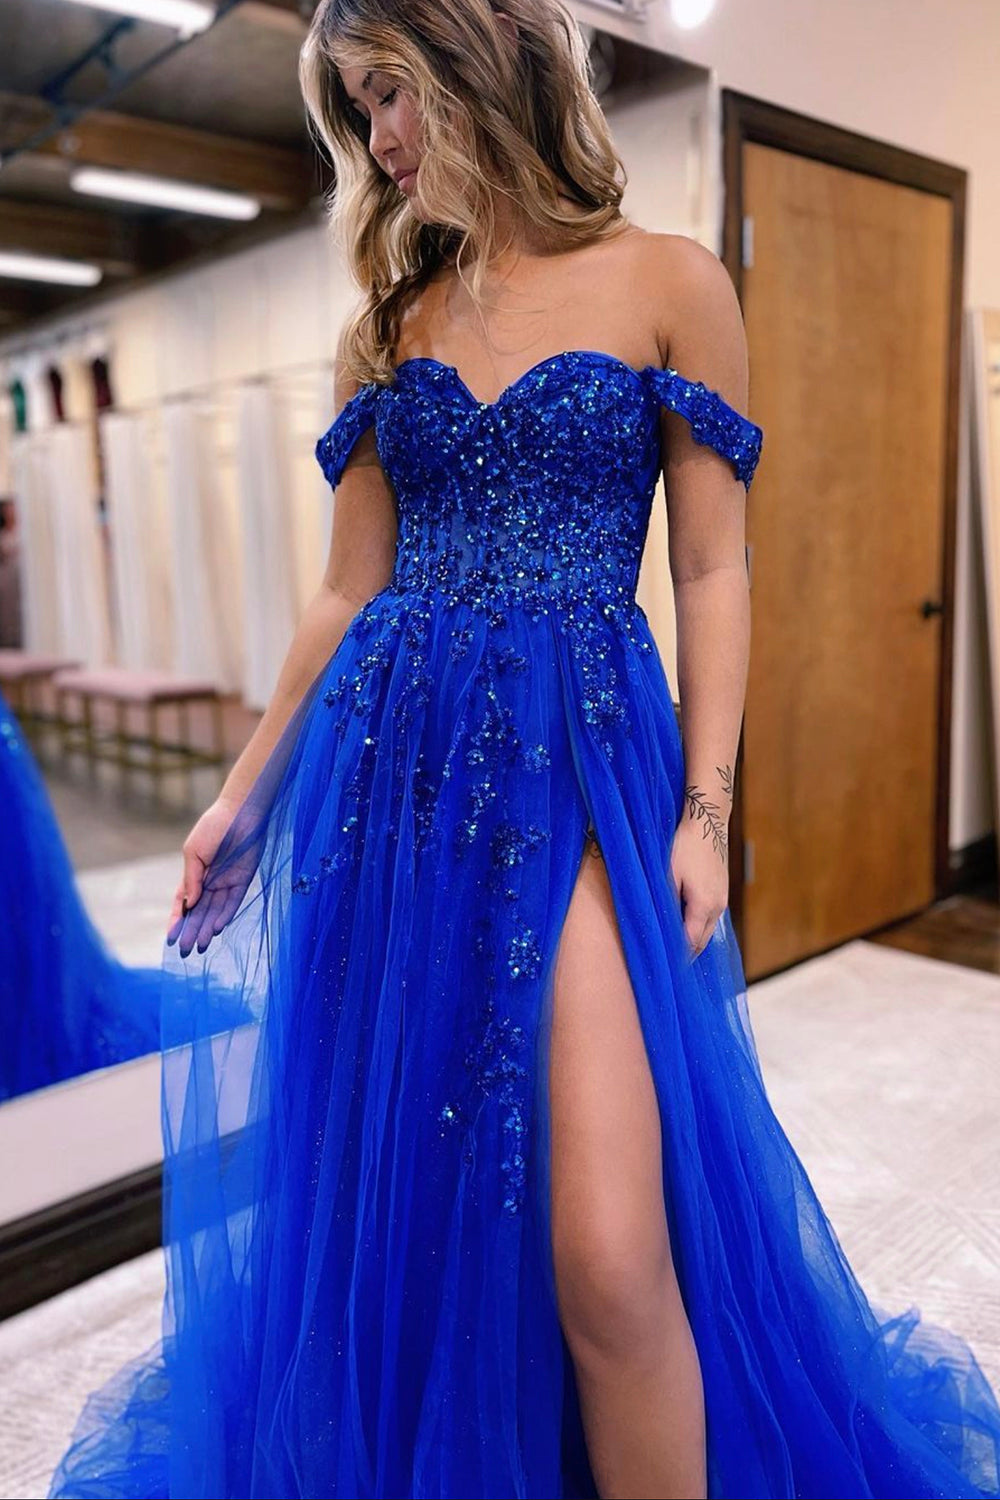 Blue Tulle Lace Long Prom Dress, Off the Shoulder Evening Dress